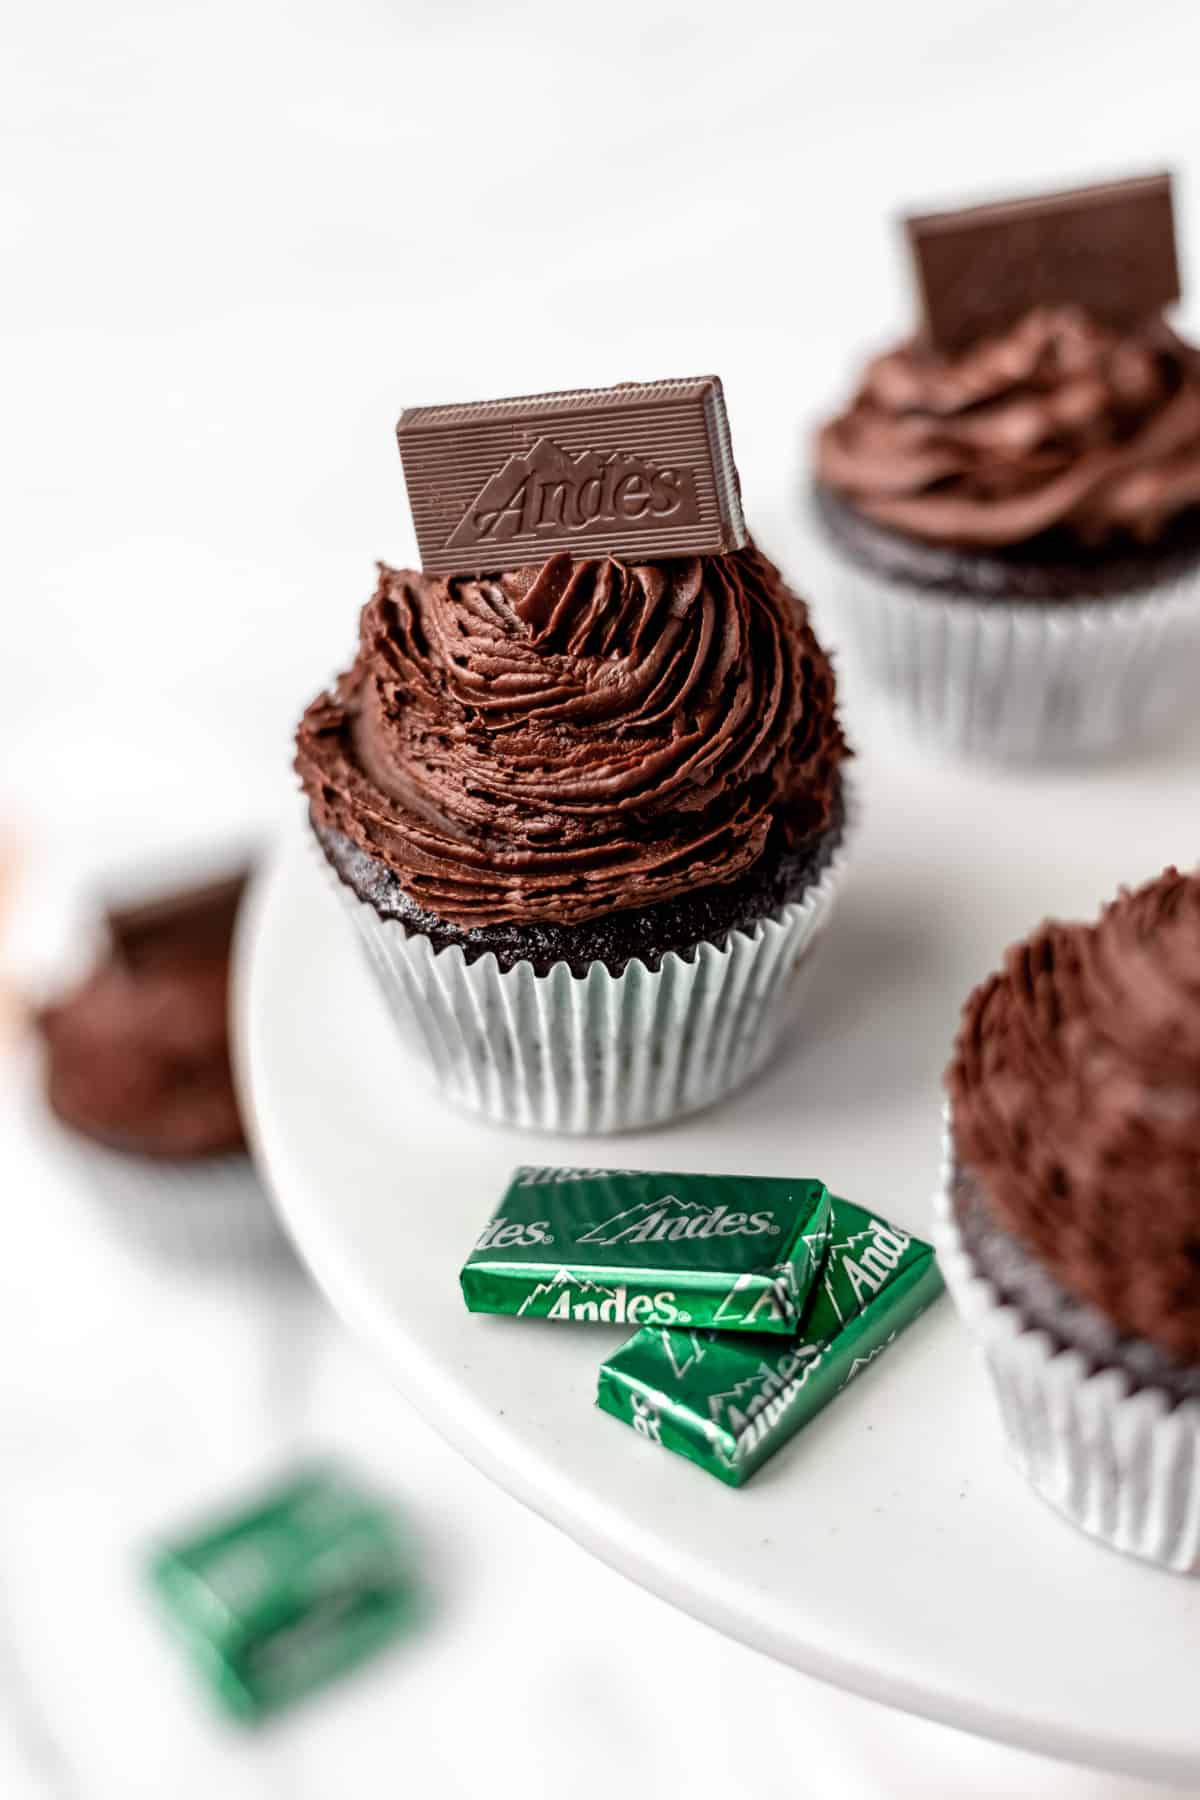 A cake stand with Chocolate Mint Cupcakes and Andes candies on it.